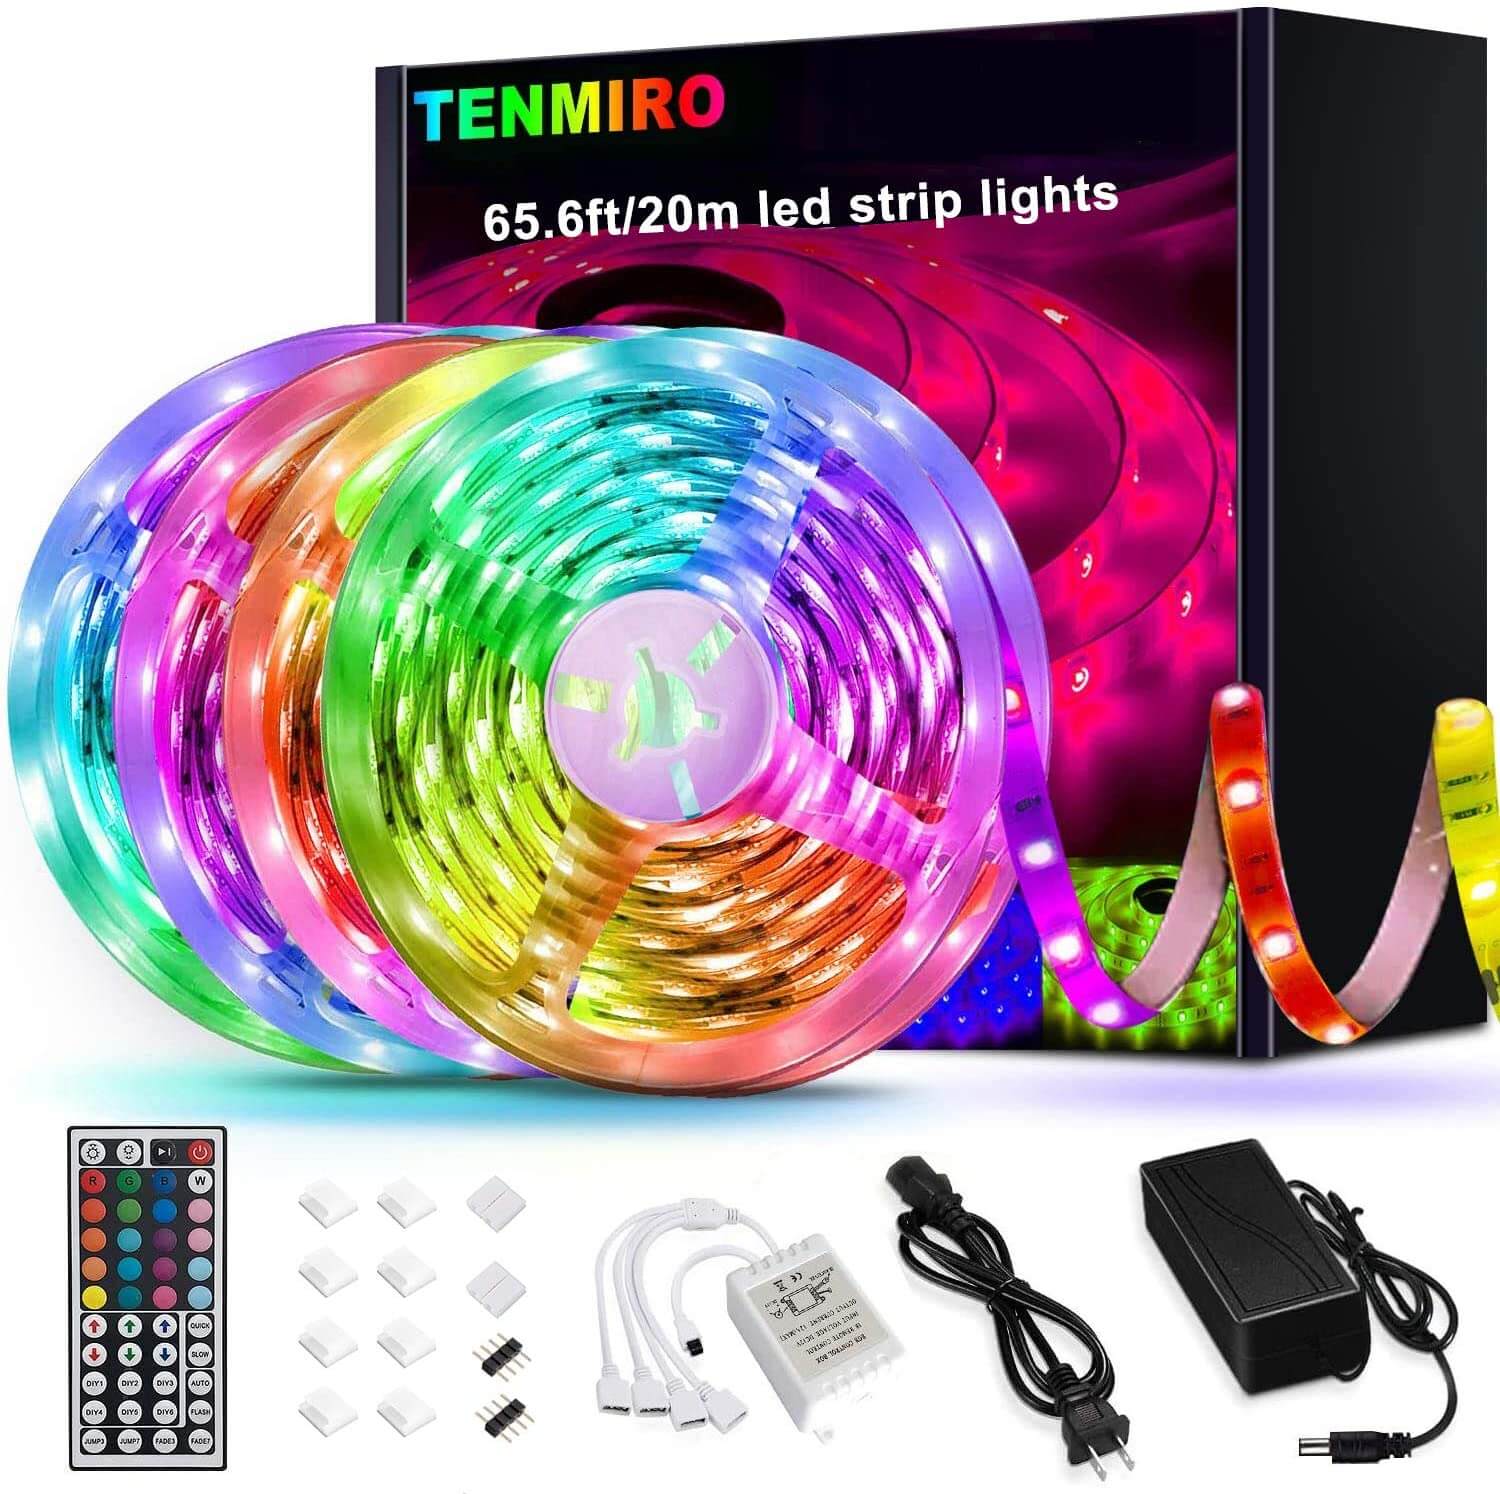 Ceiling Kitchen Homemory 32.8FT LED Strip Lights Music Sync Color Changing TV 5050 LED Lights Strip Kit with 40 Keys Remote RGB Rope Light Waterproof App Phone controlled by Bluetooth for Bedroom 